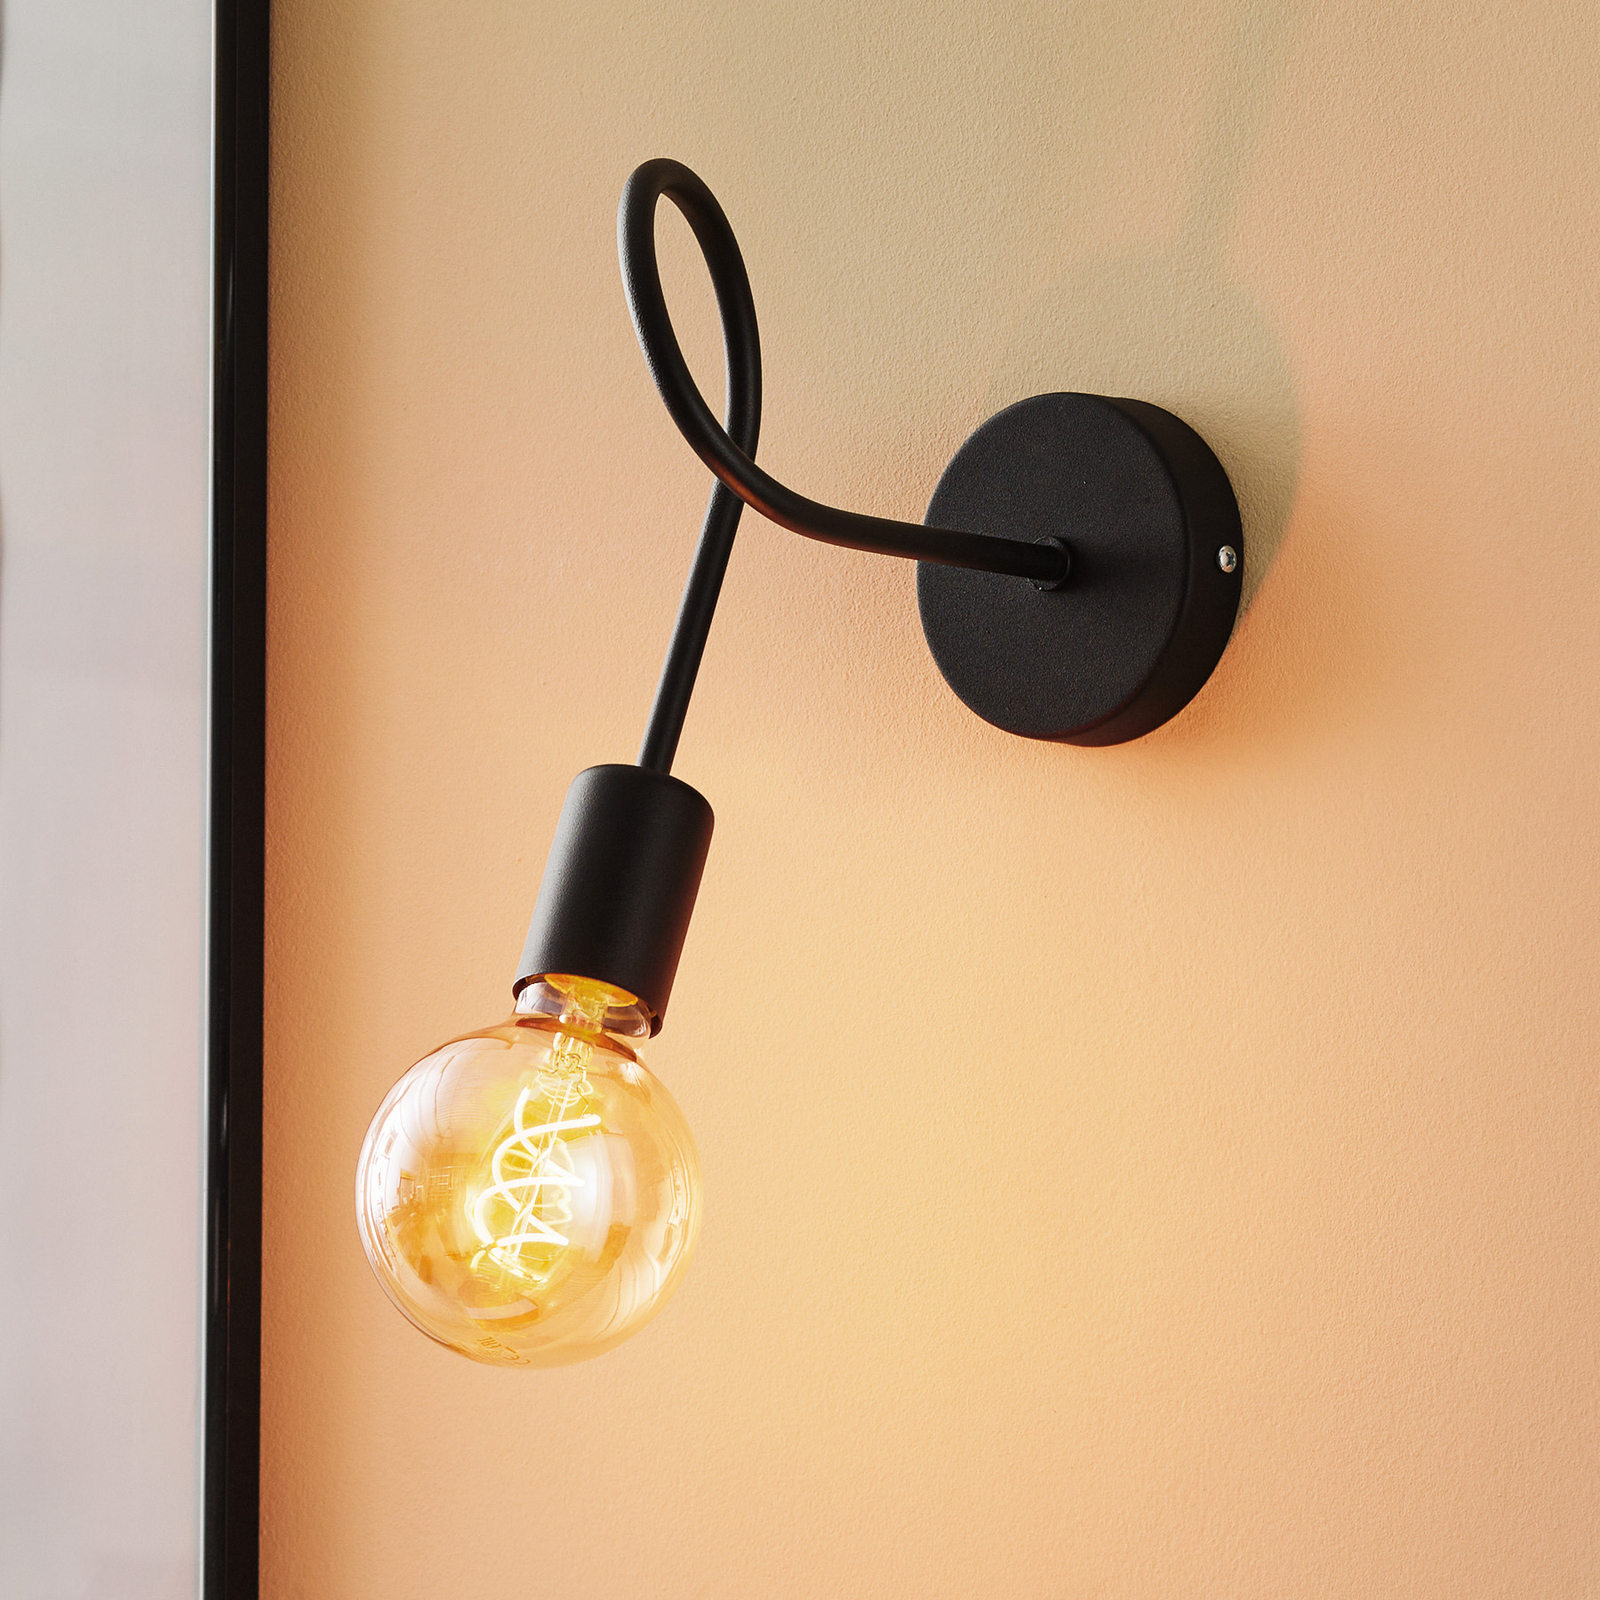 Oxford wall light made of metal in black